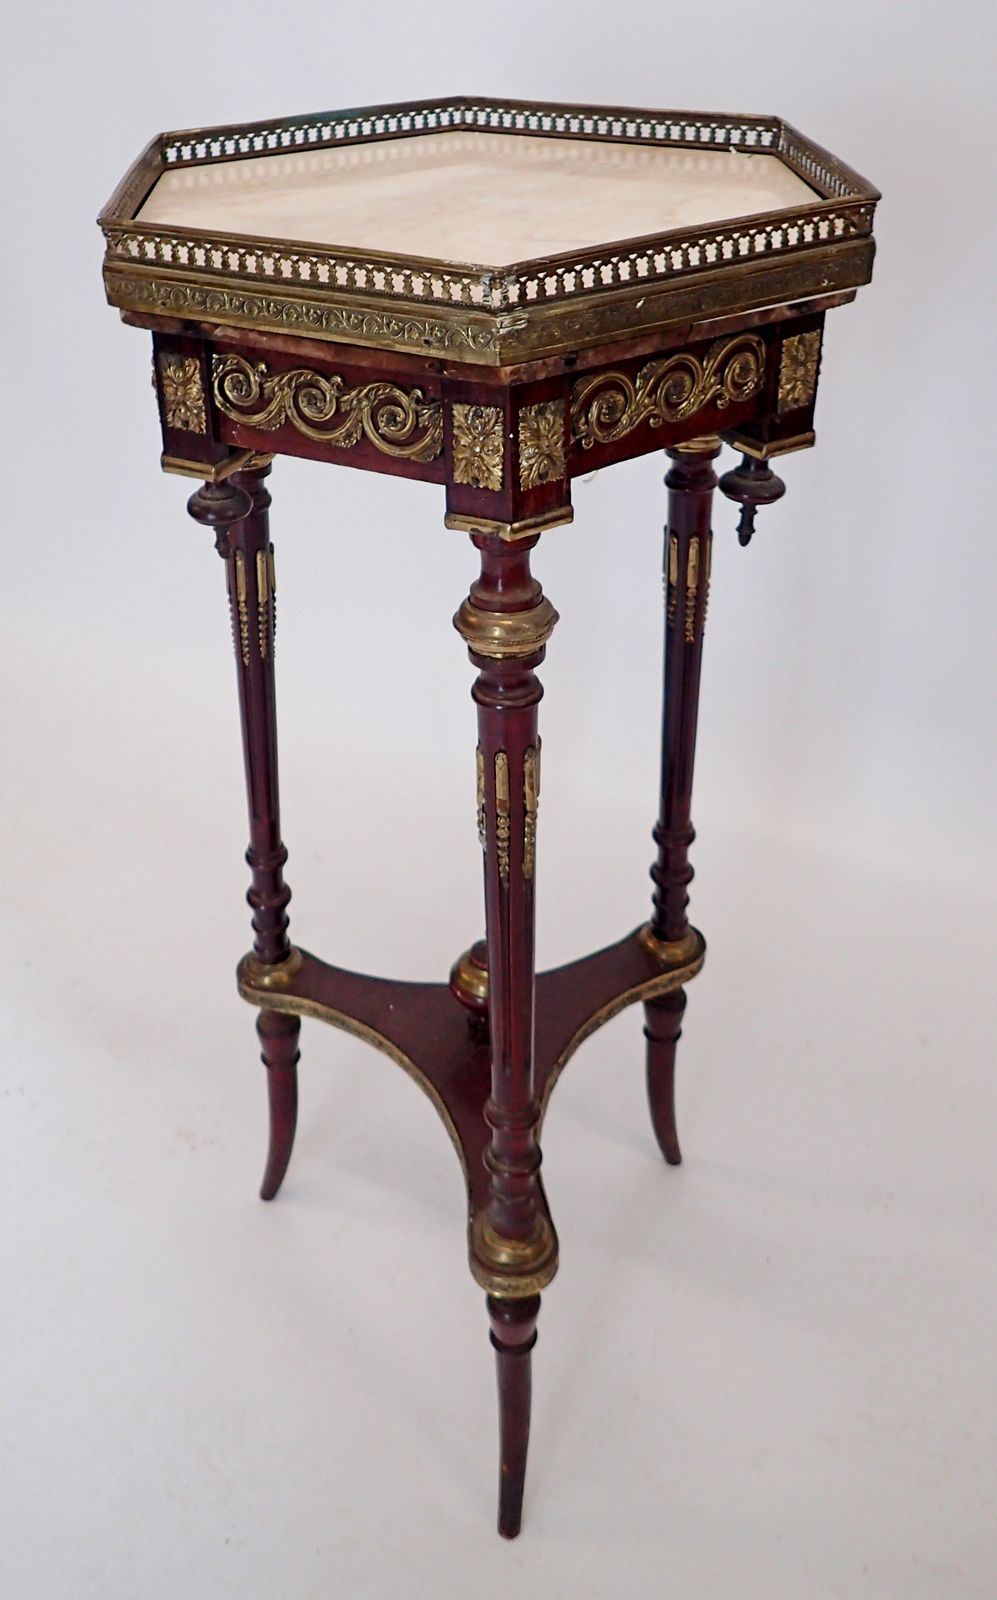 A French hexagonal marble topped mahogany occasional table with three slender supports united by